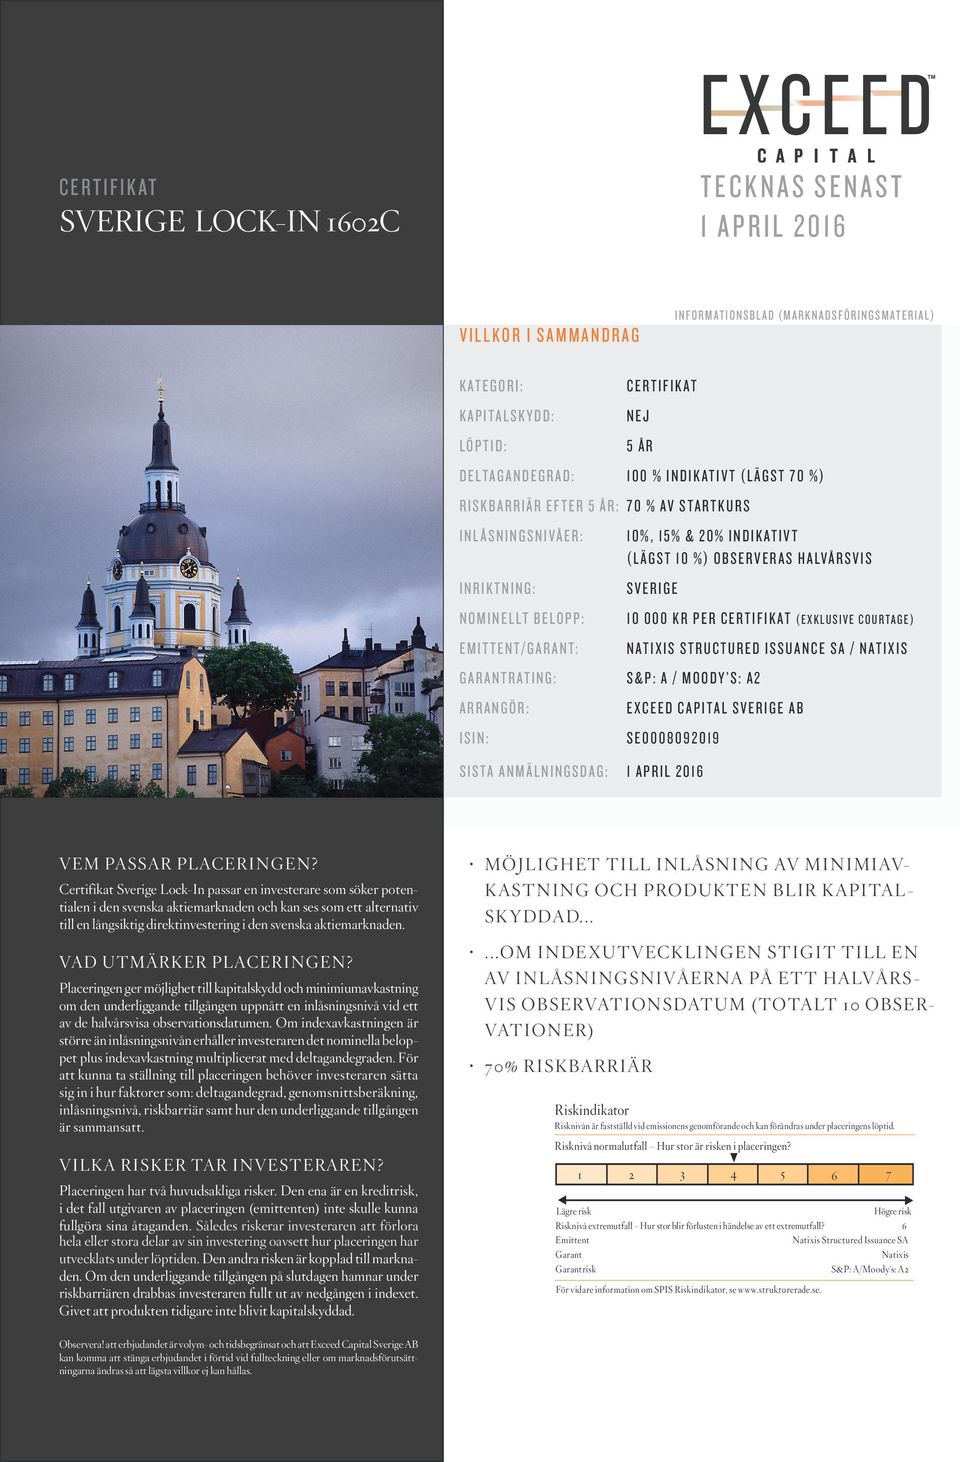 CERTIFIKAT (EXKLUSIVE COURTAGE) EMITTENT/GARANT: NATIXIS STRUCTURED ISSUANCE SA / NATIXIS GARANTRATING: S&P: A / MOODY S: A2 ARRANGÖR: EXCEED CAPITAL SVERIGE AB ISIN: SE0008092019 SISTA